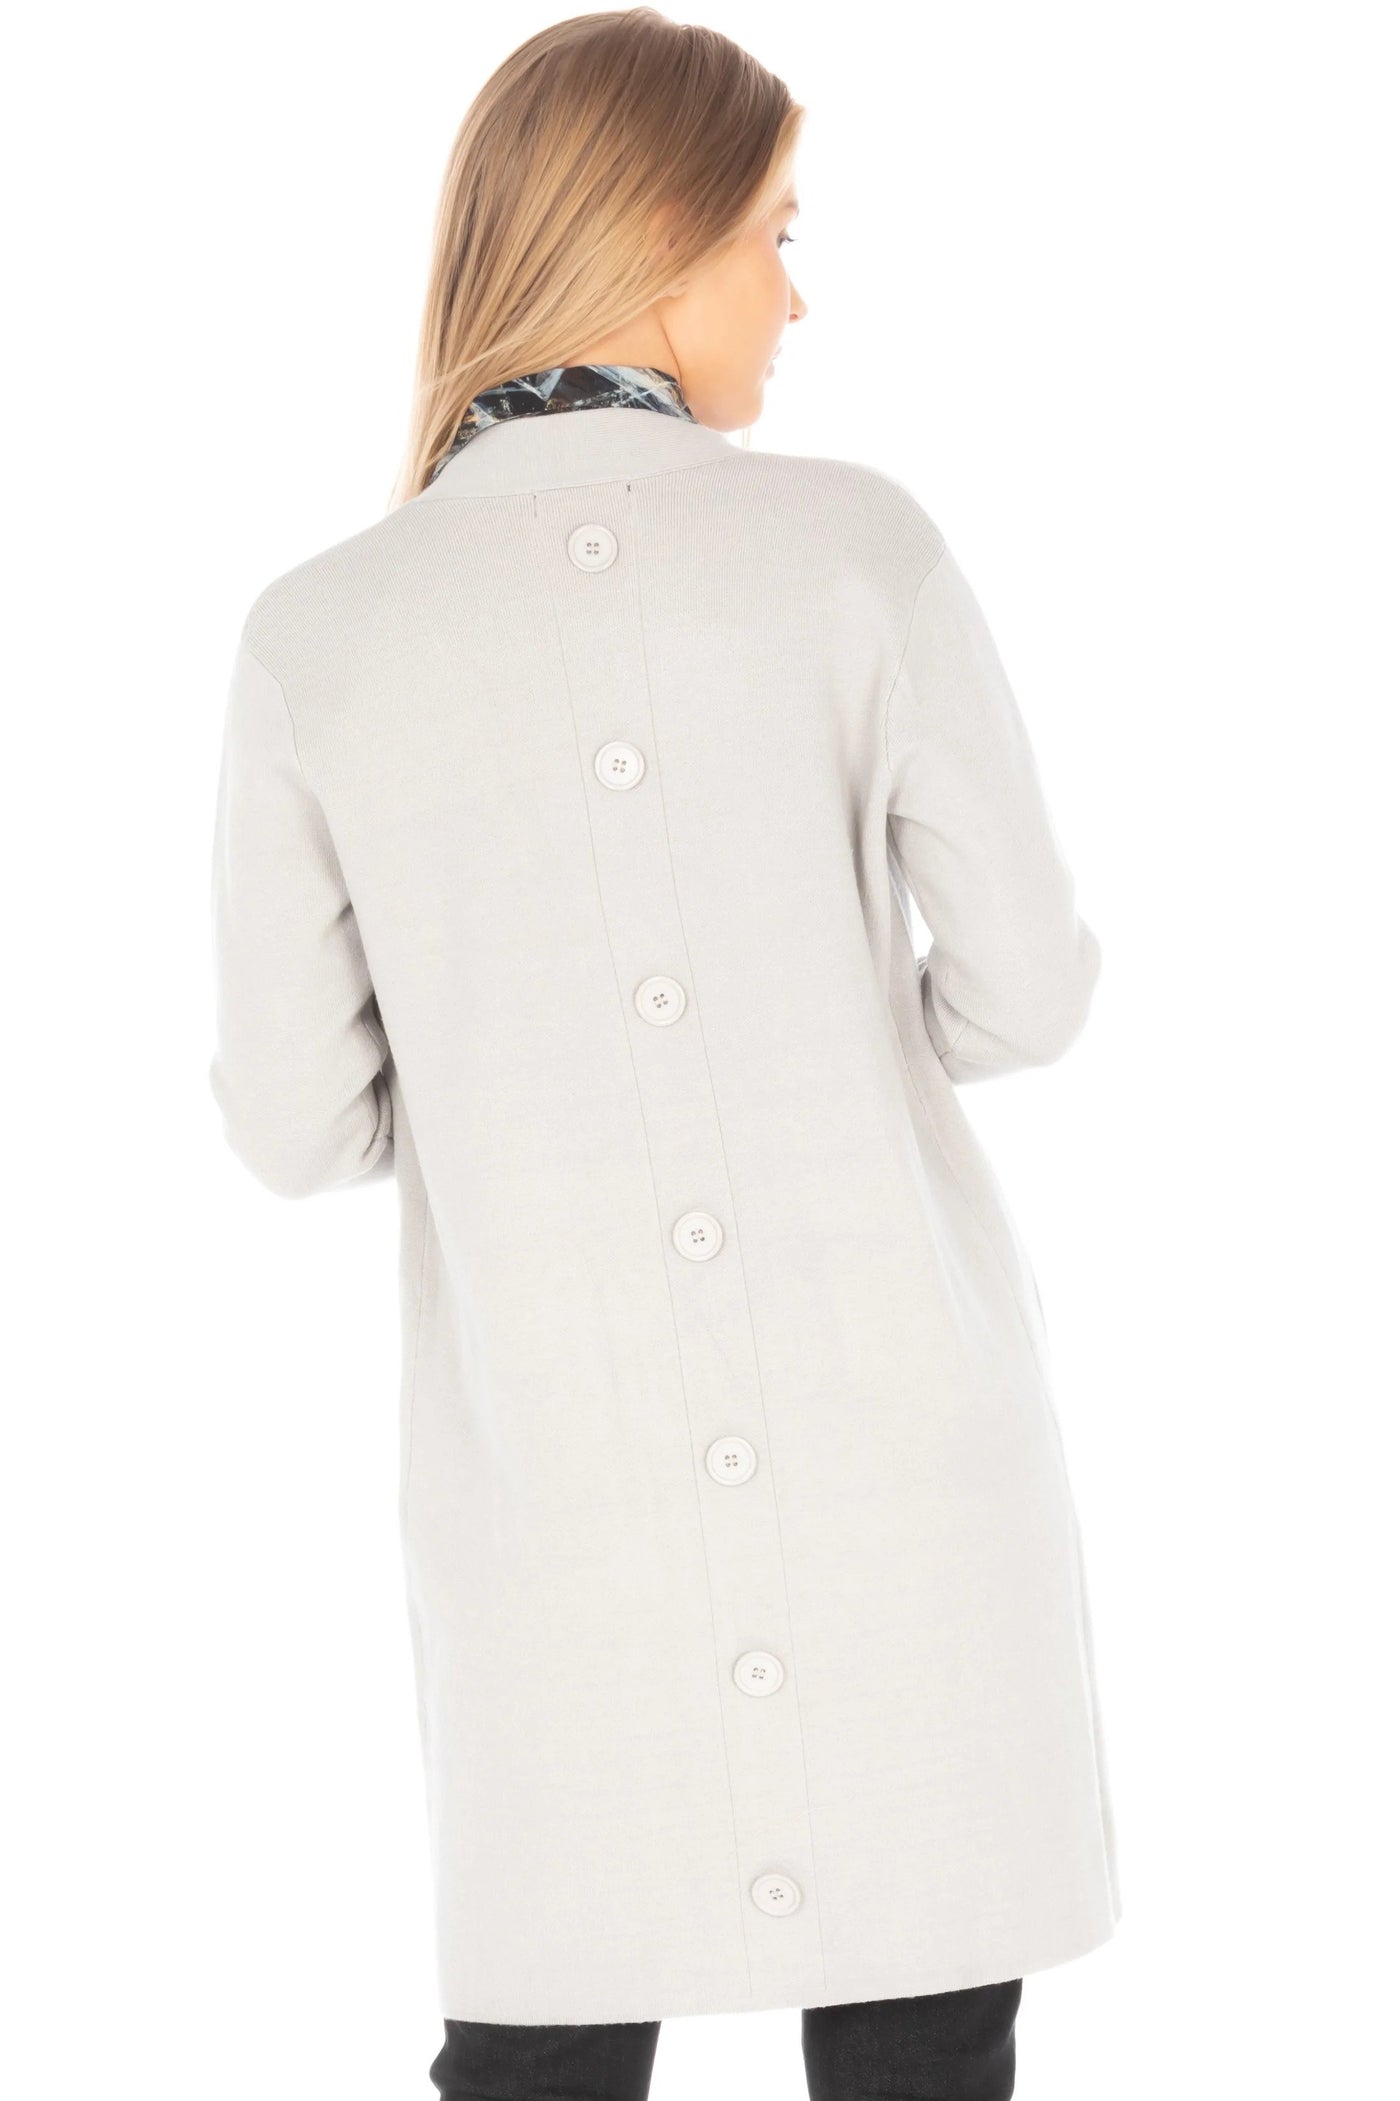 APNY Open Front Cardigan With Back Button Detail Back.